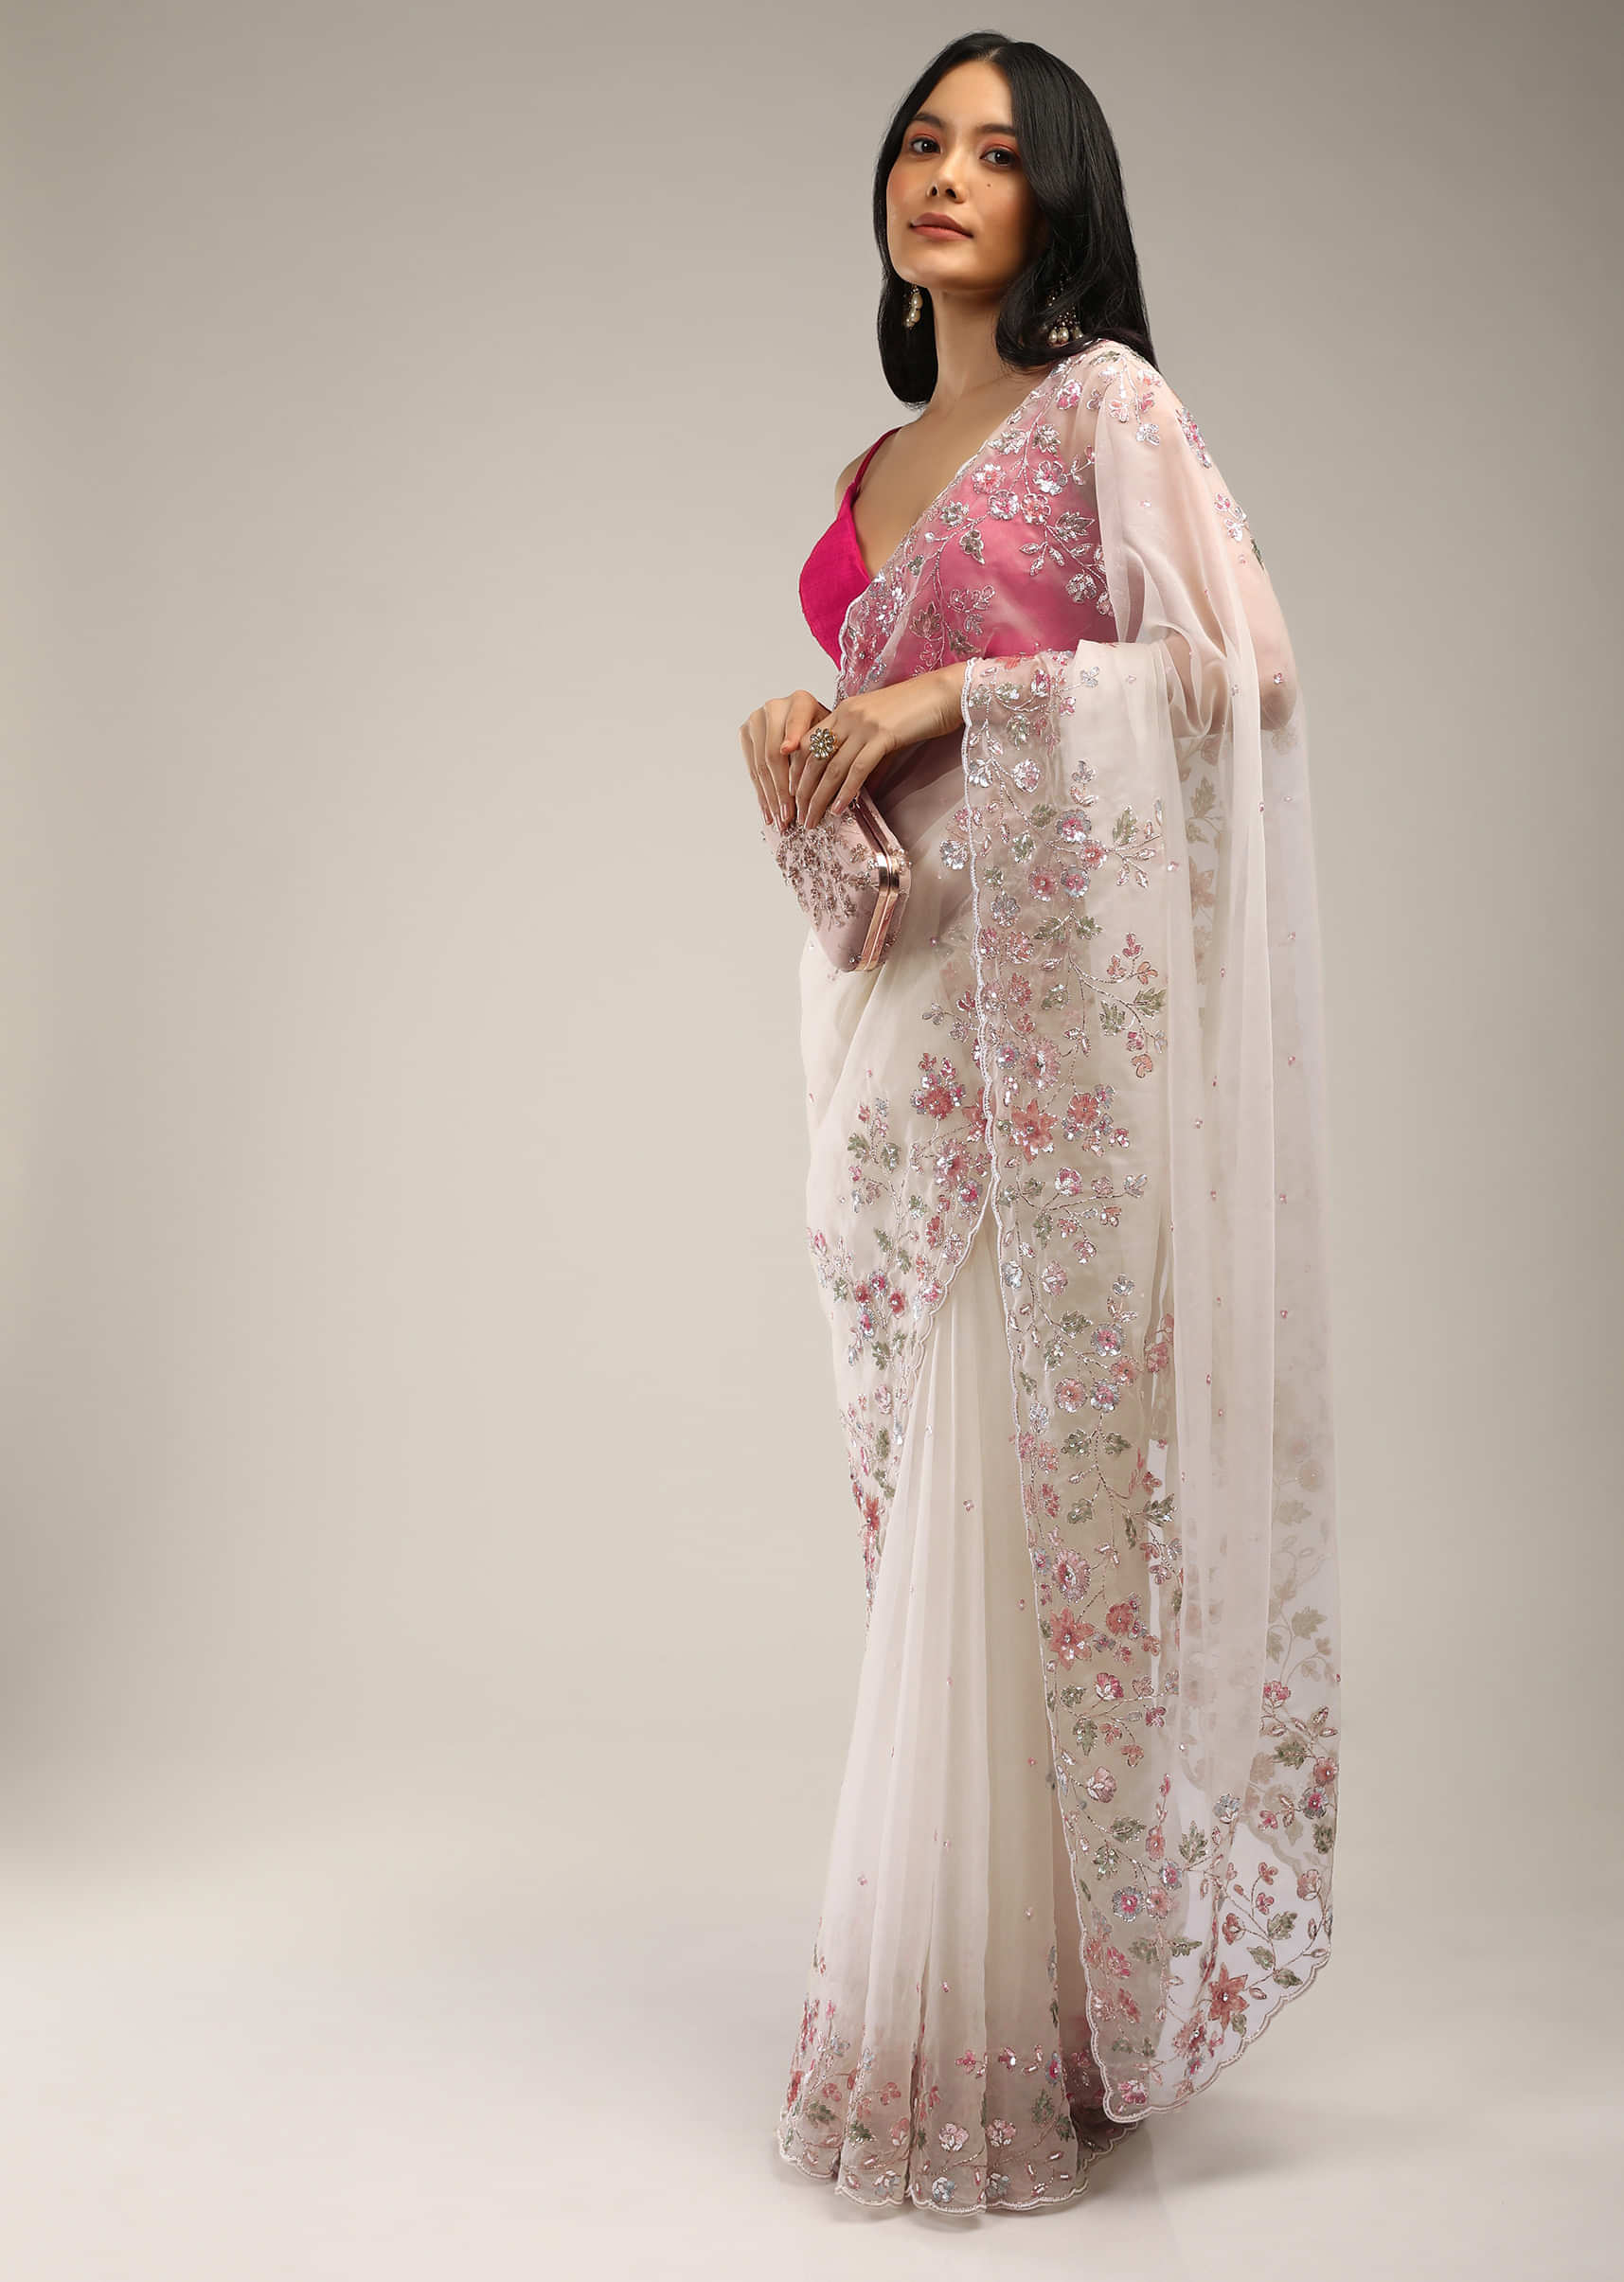 Powder White Saree In Organza With Multi Colored Sequins And Pita Zari Embroidered Floral Motifs On The Border  